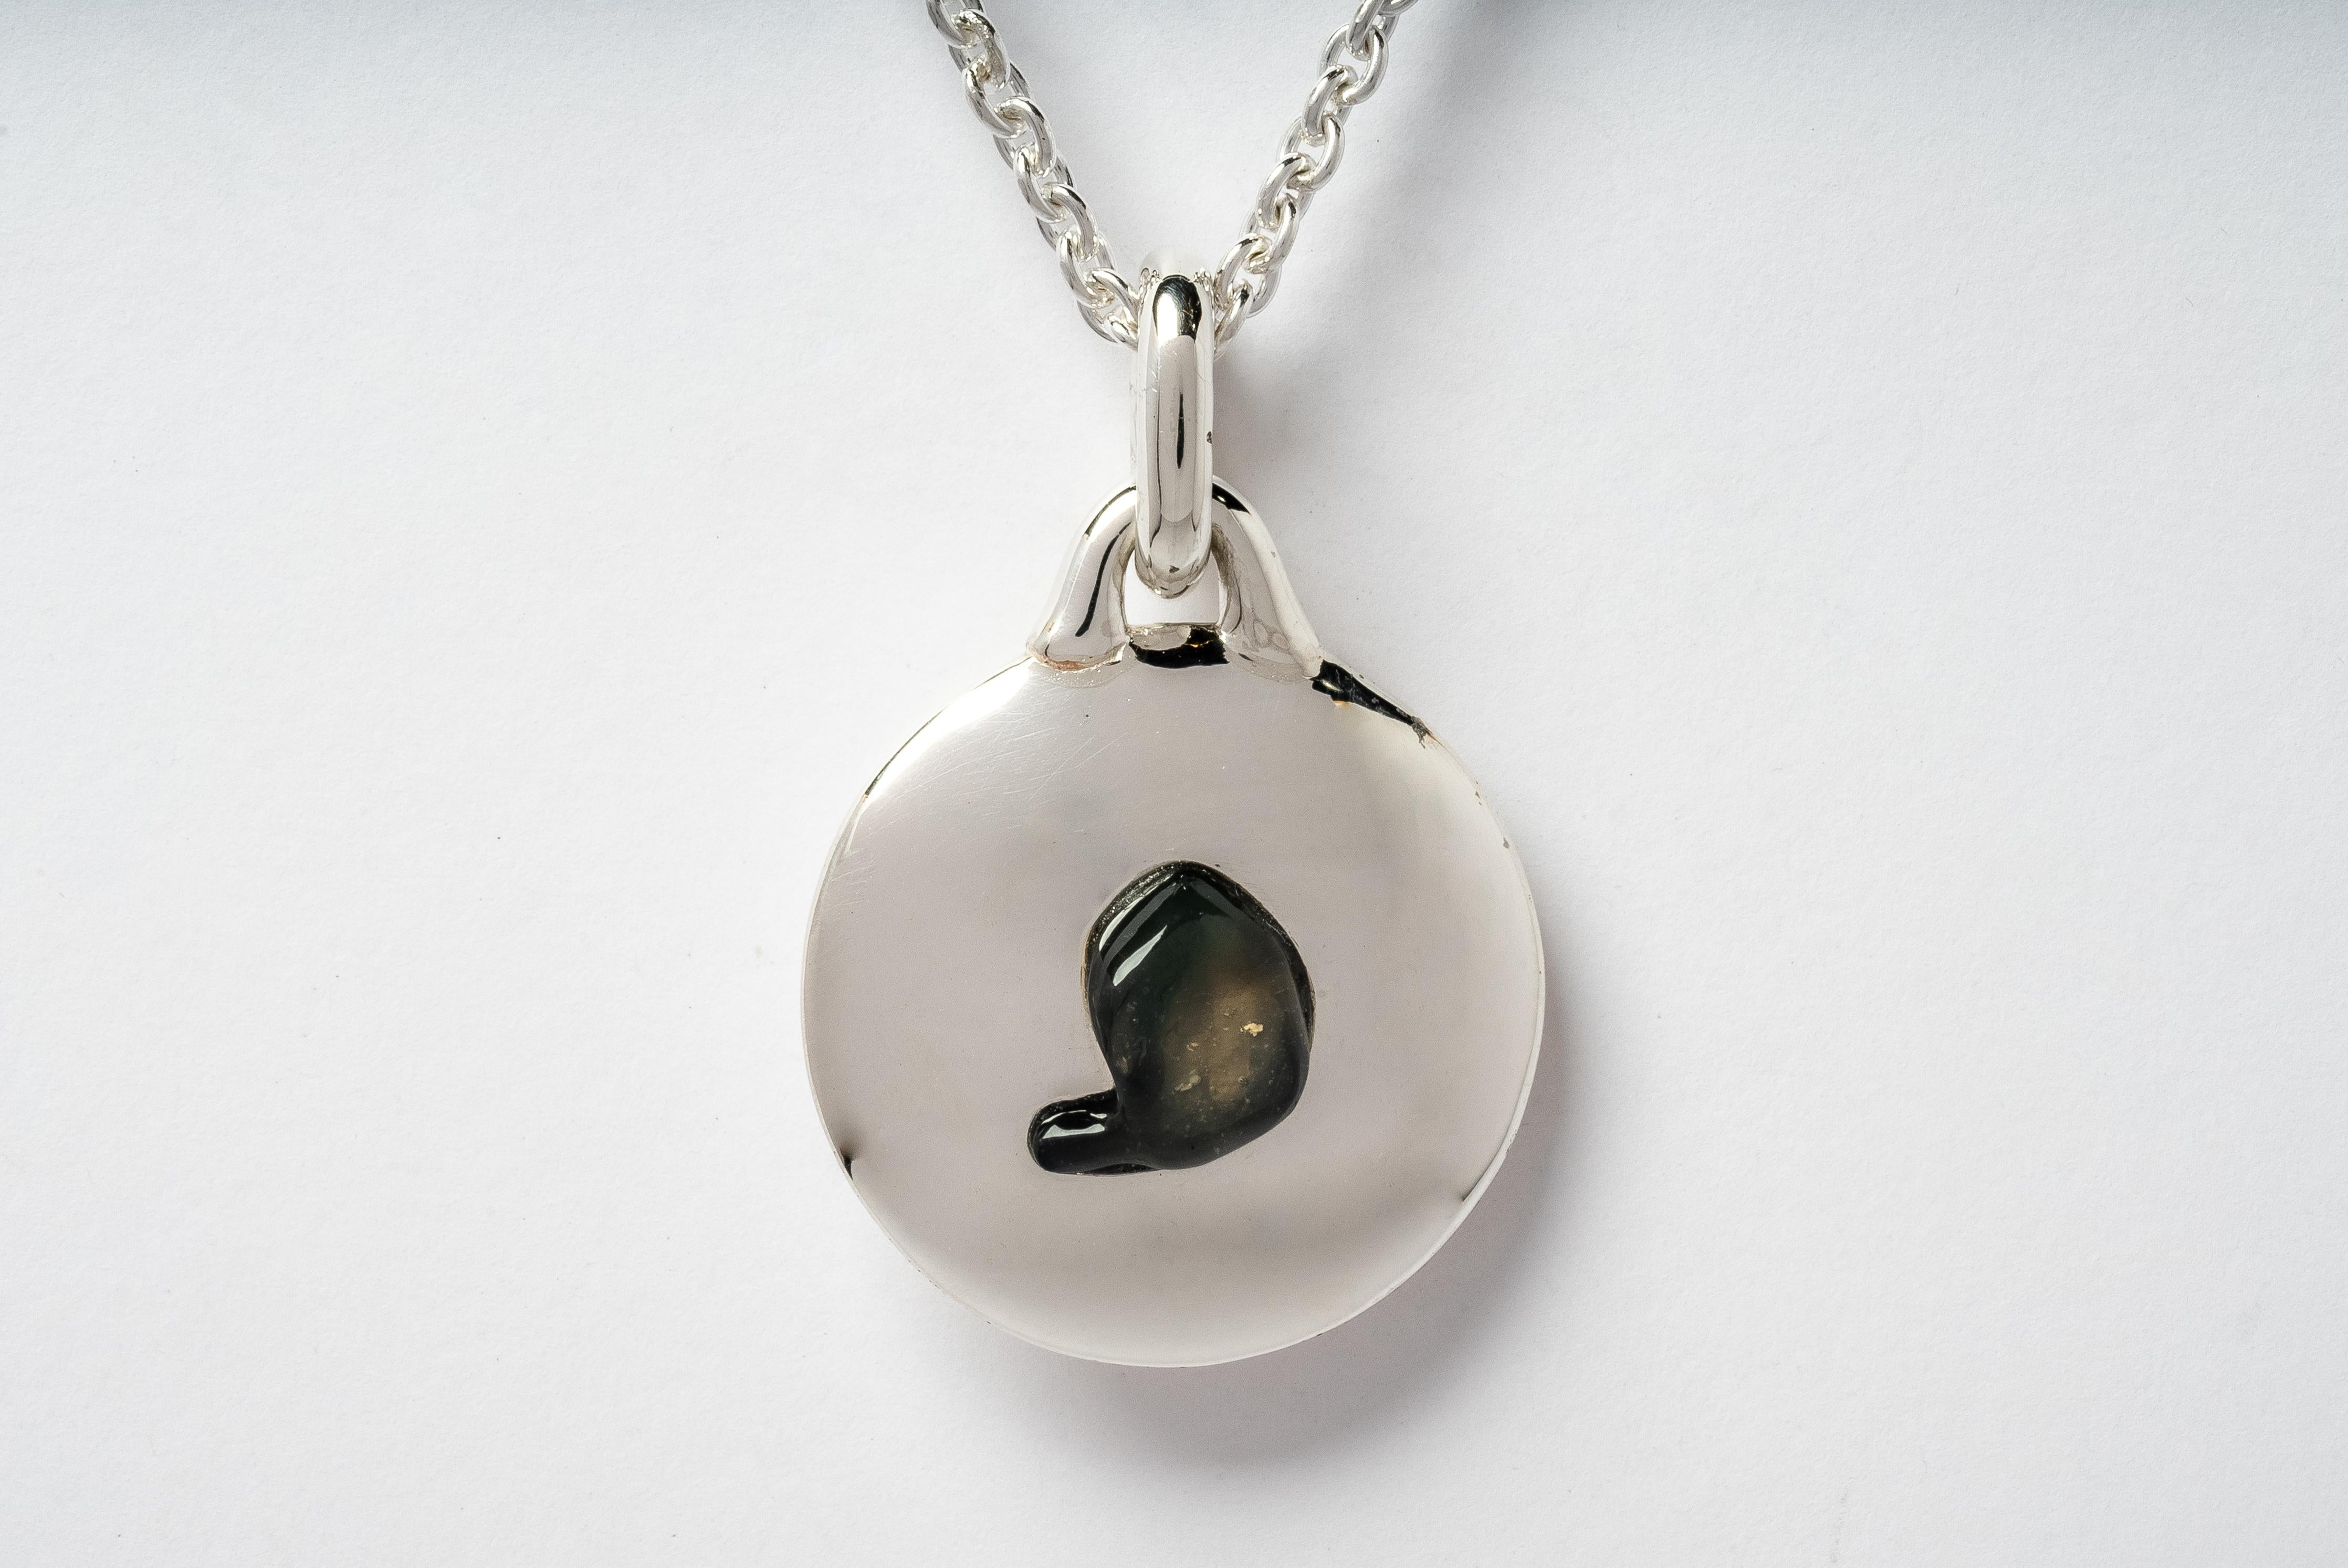 Necklace in the shape of disk made in polished sterling silver and a slab of rough opal. It comes on 74 cm sterling silver chain.